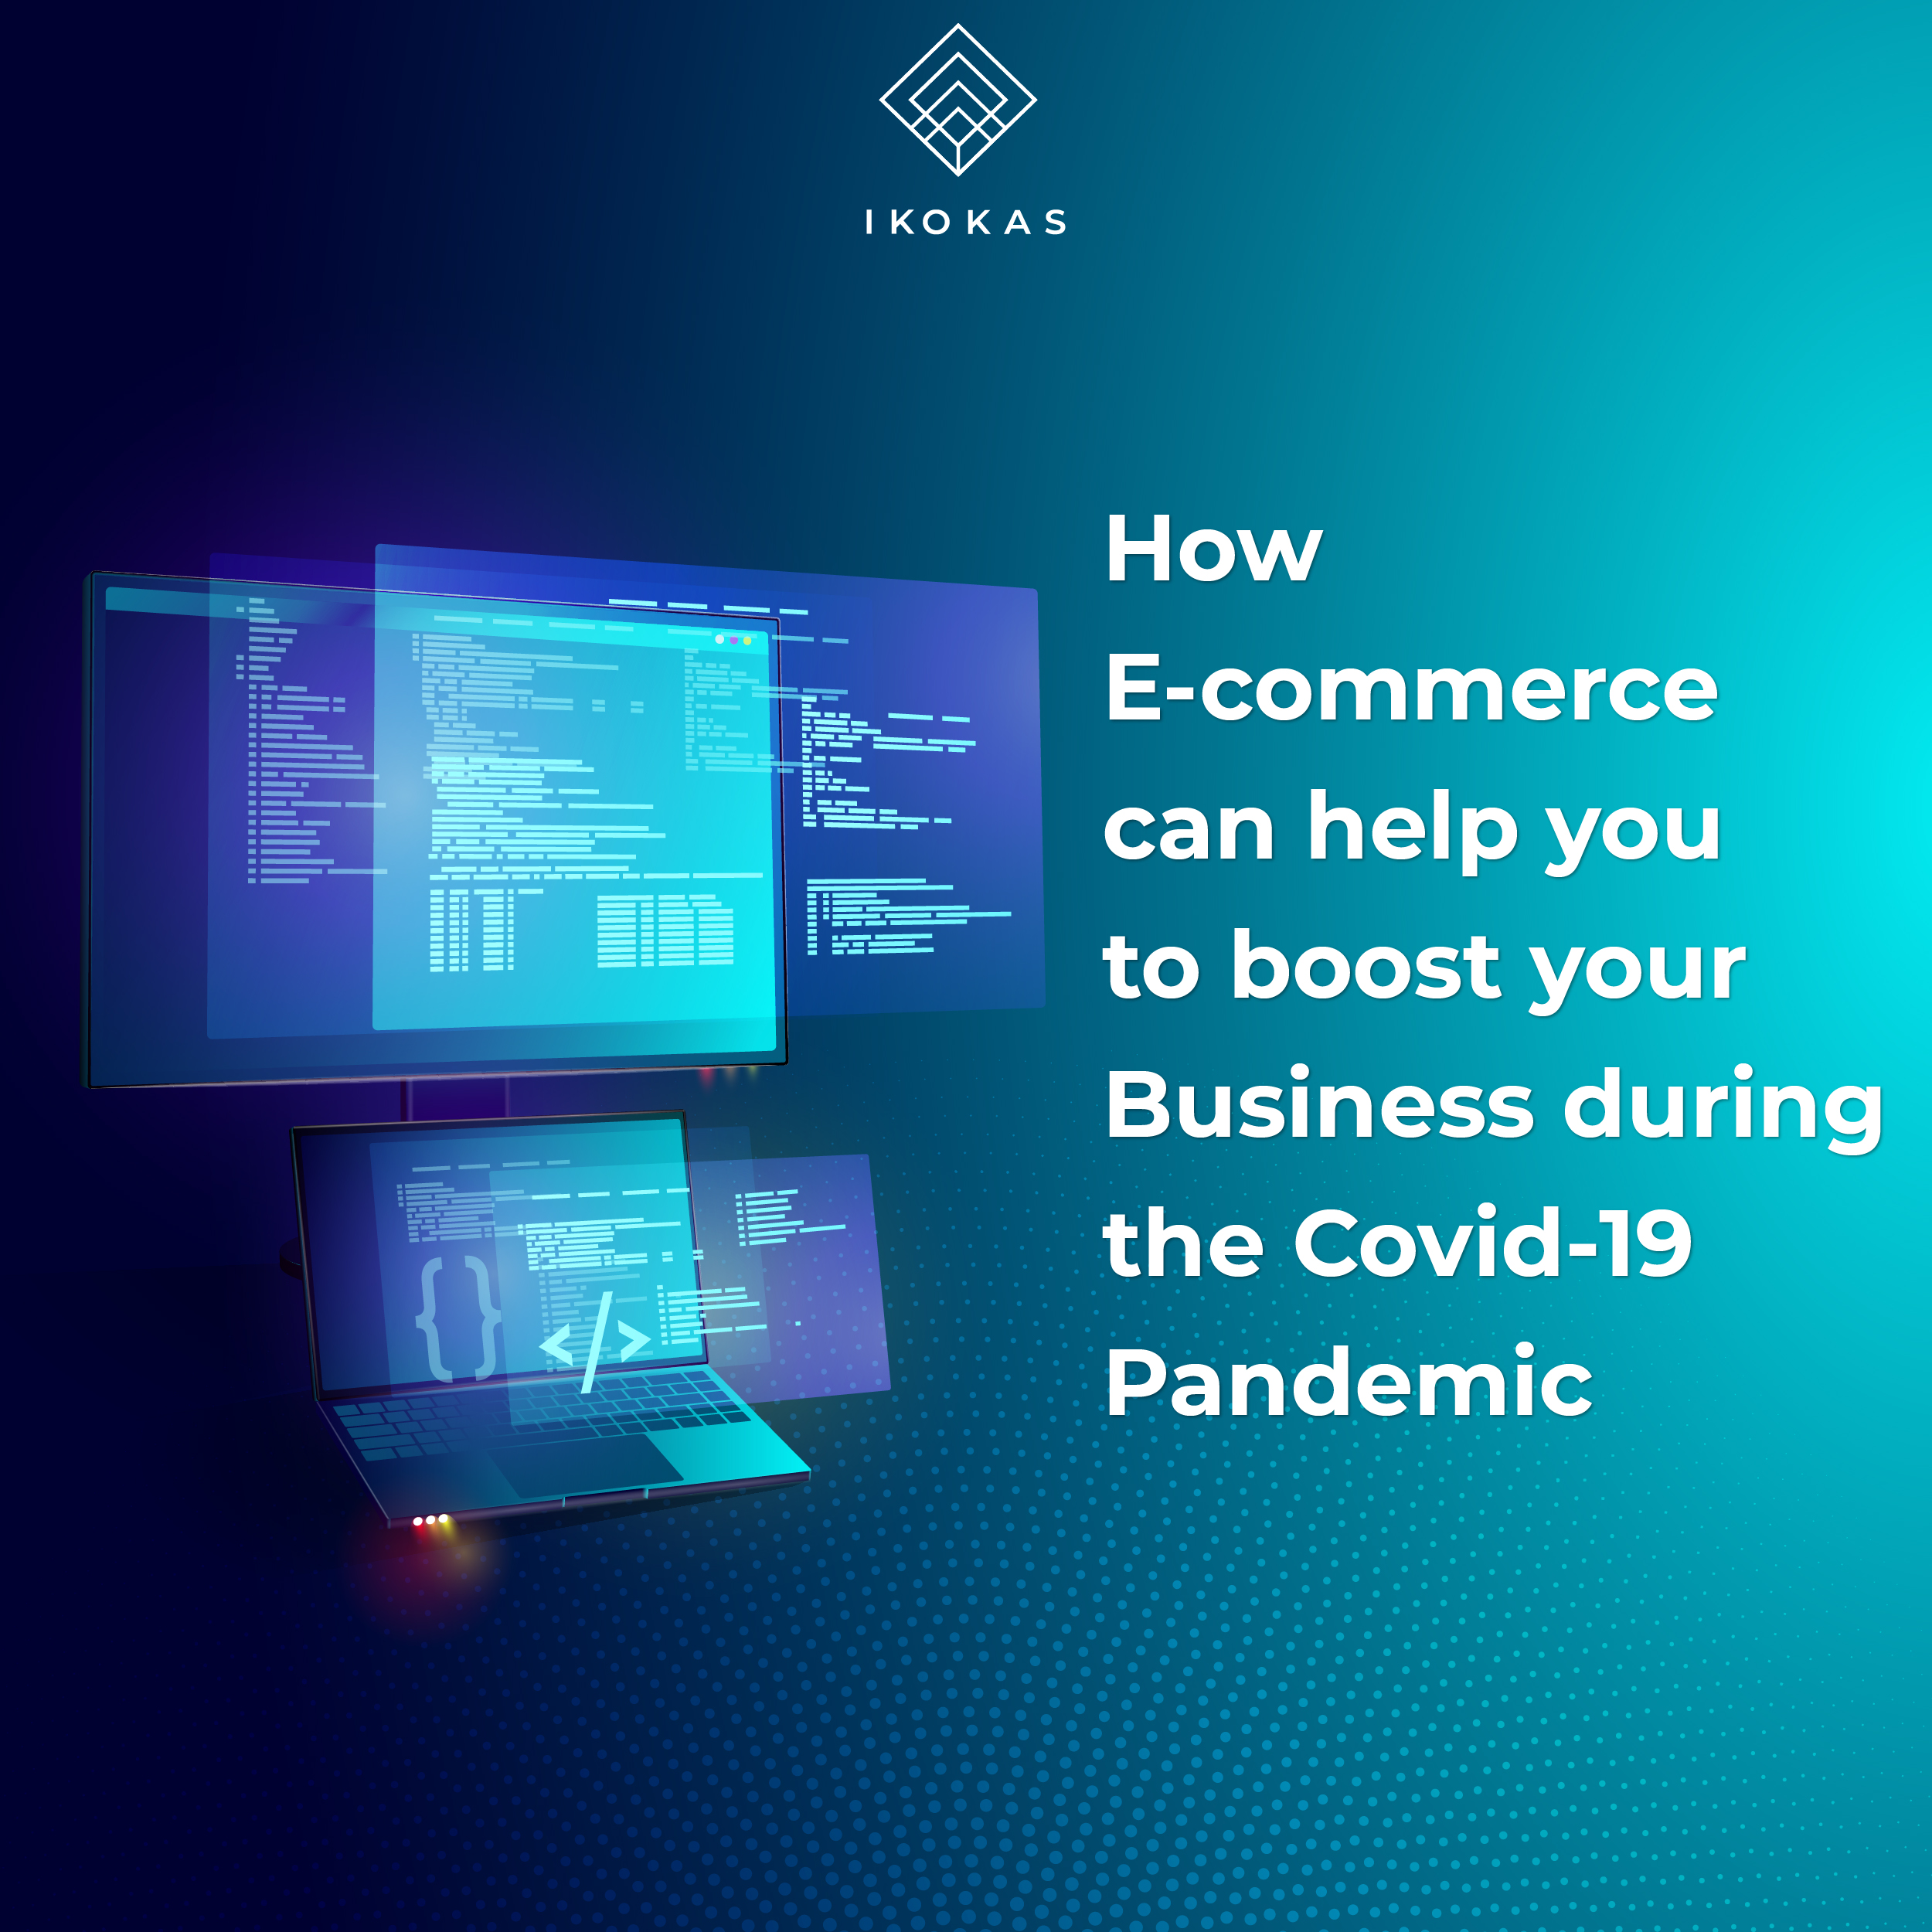 Boost your Business during the Covid-19 Pandemic